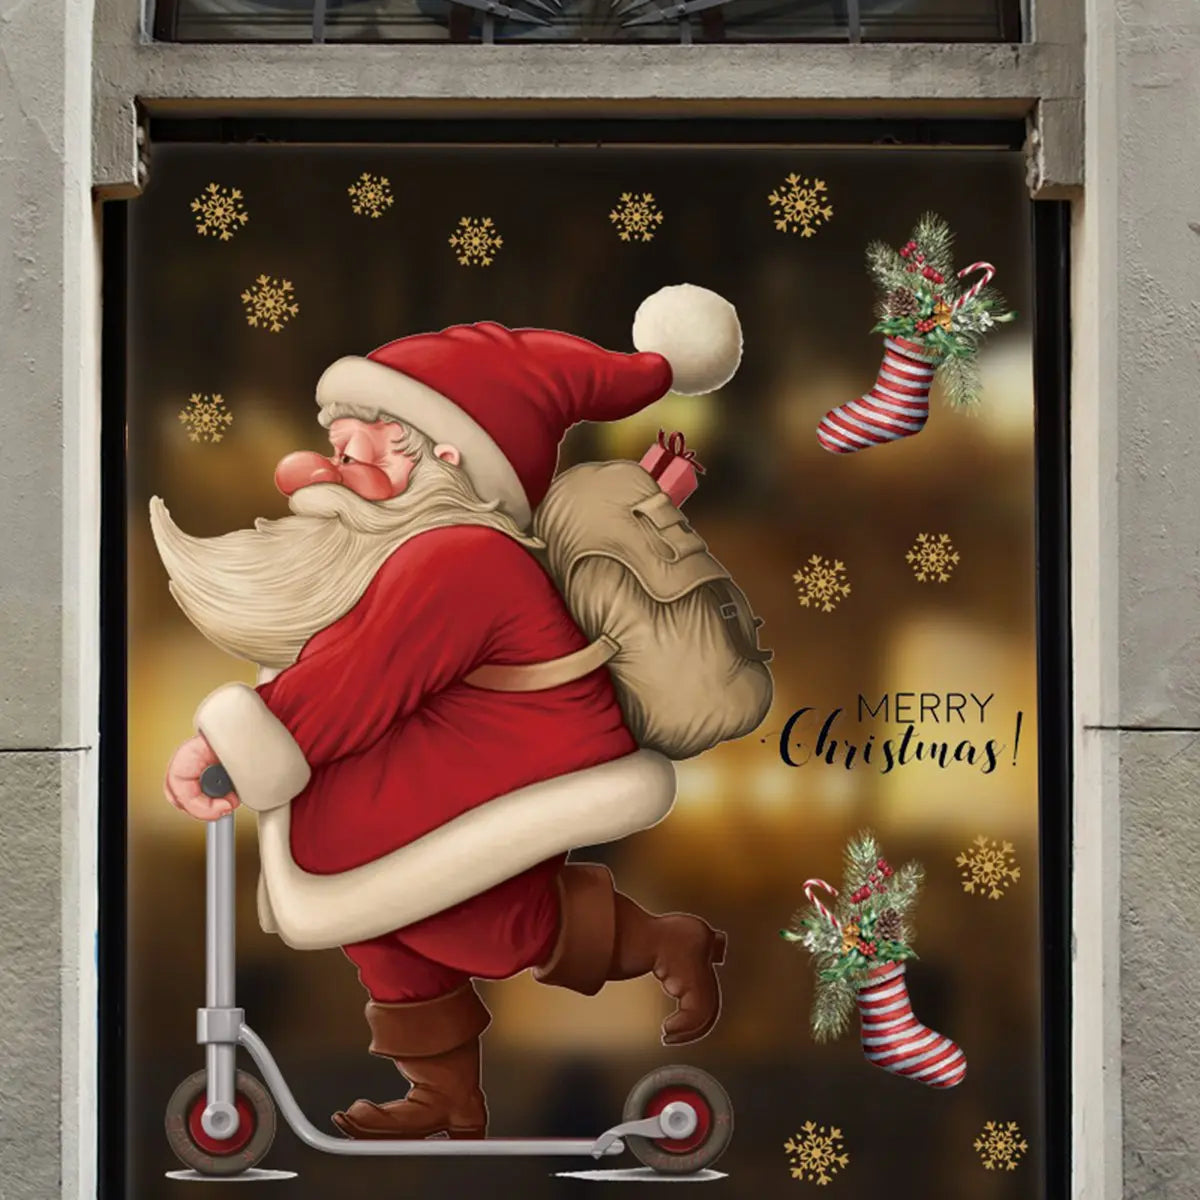 Merry Christmas Home Decor Window Sticker - Xmas Ornament for Festive Natal Gifts